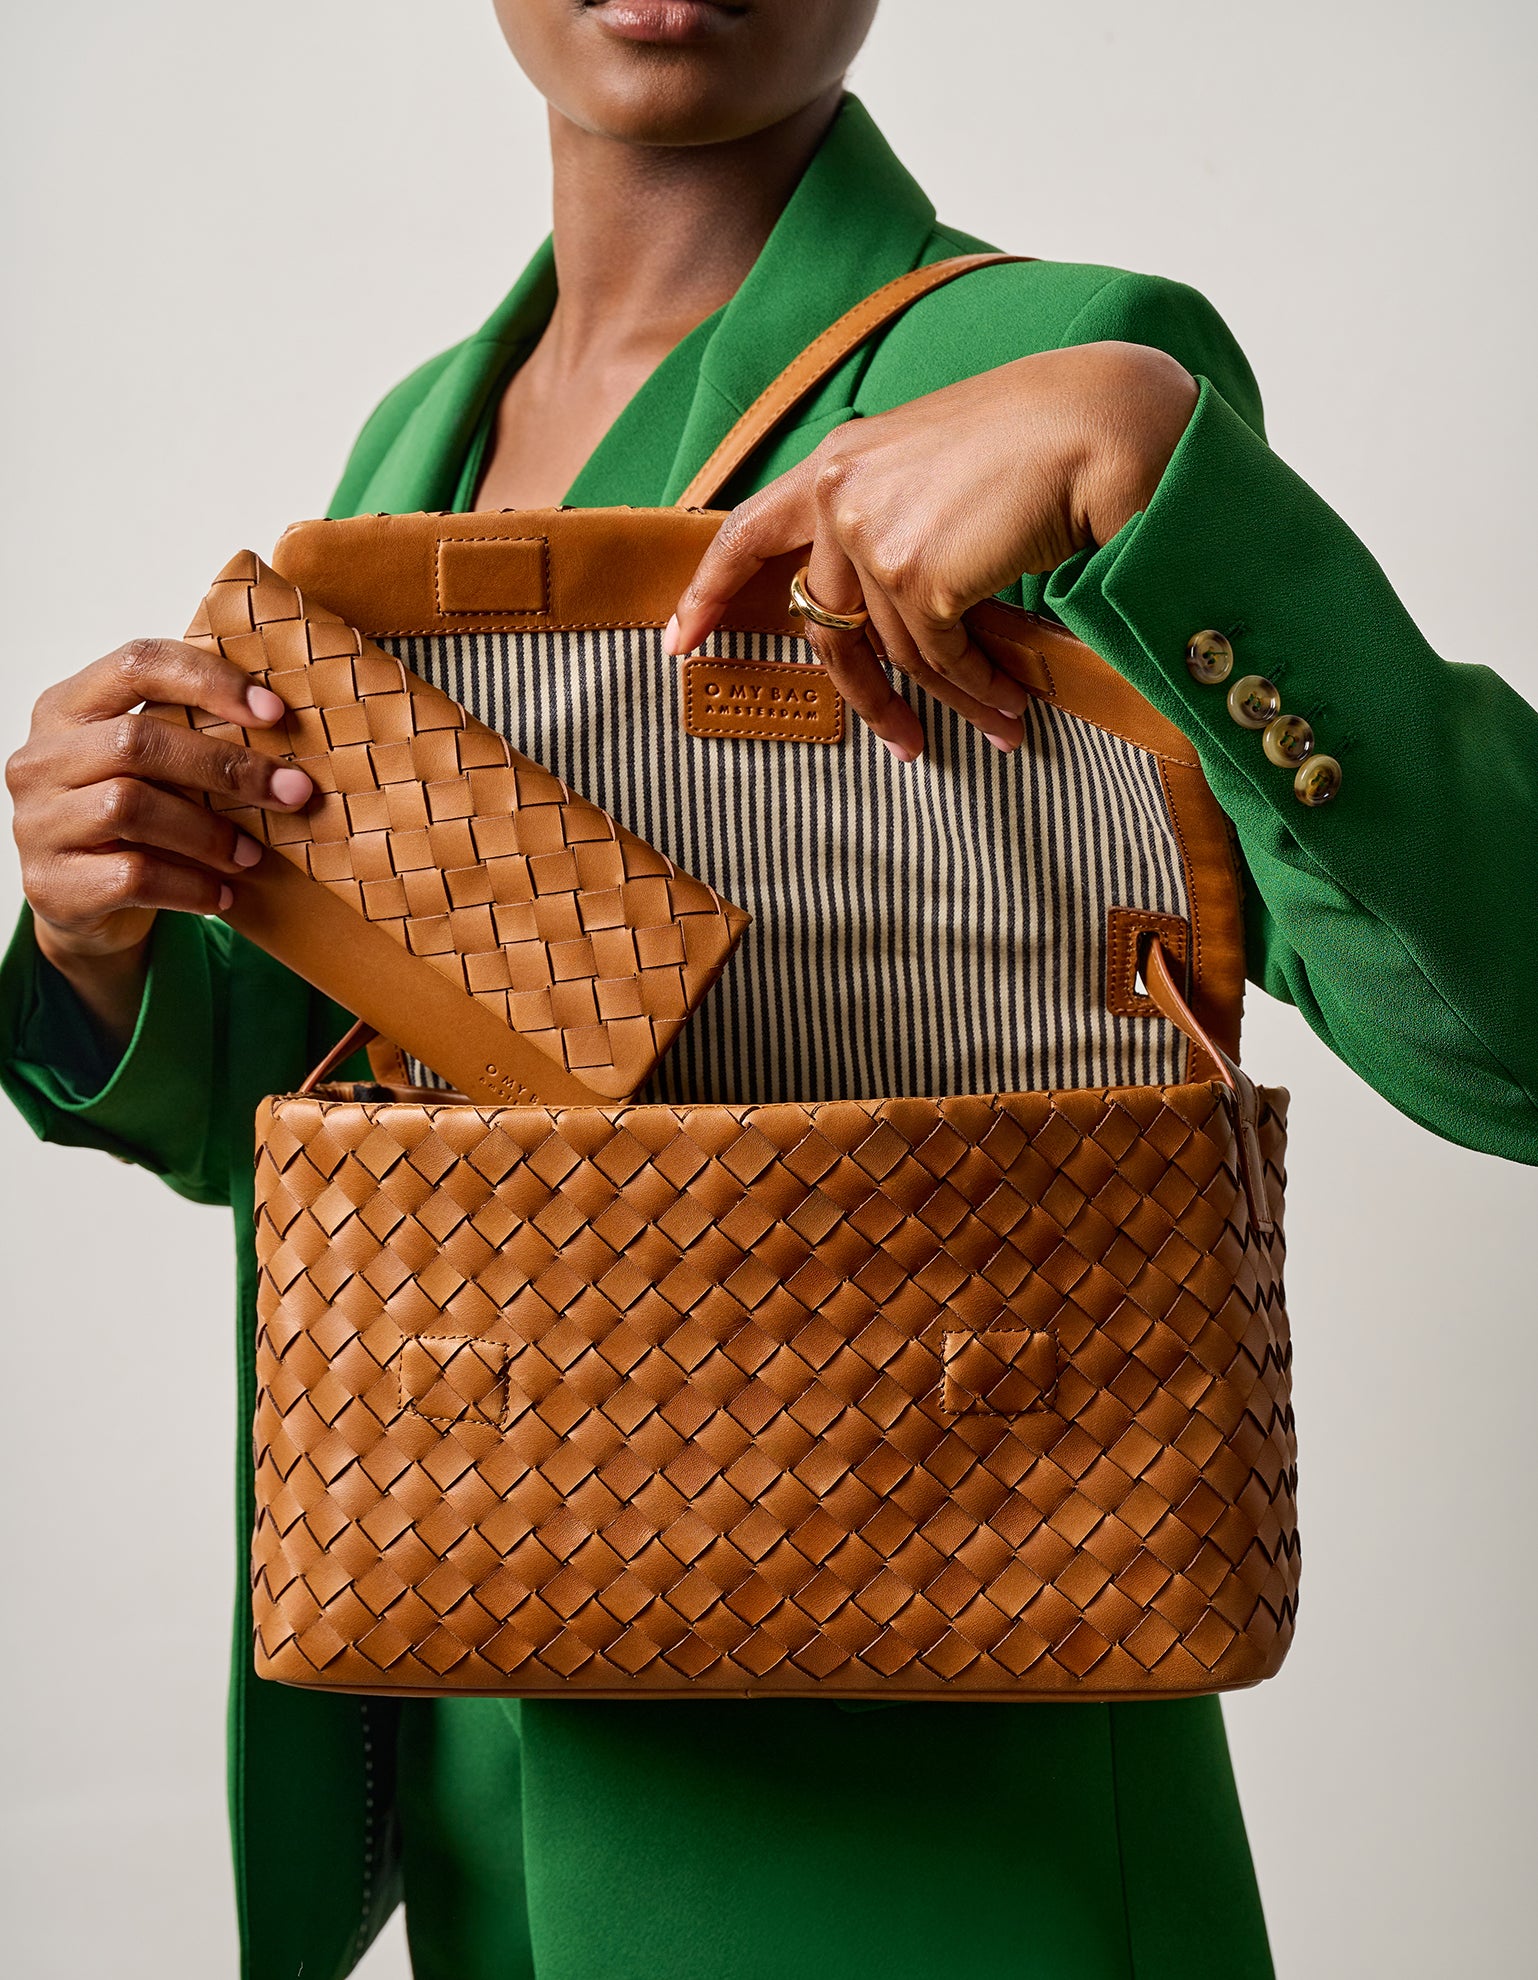 Campaign image - model with woven Pau's Pouch Wallet and Woven Kenzie bag